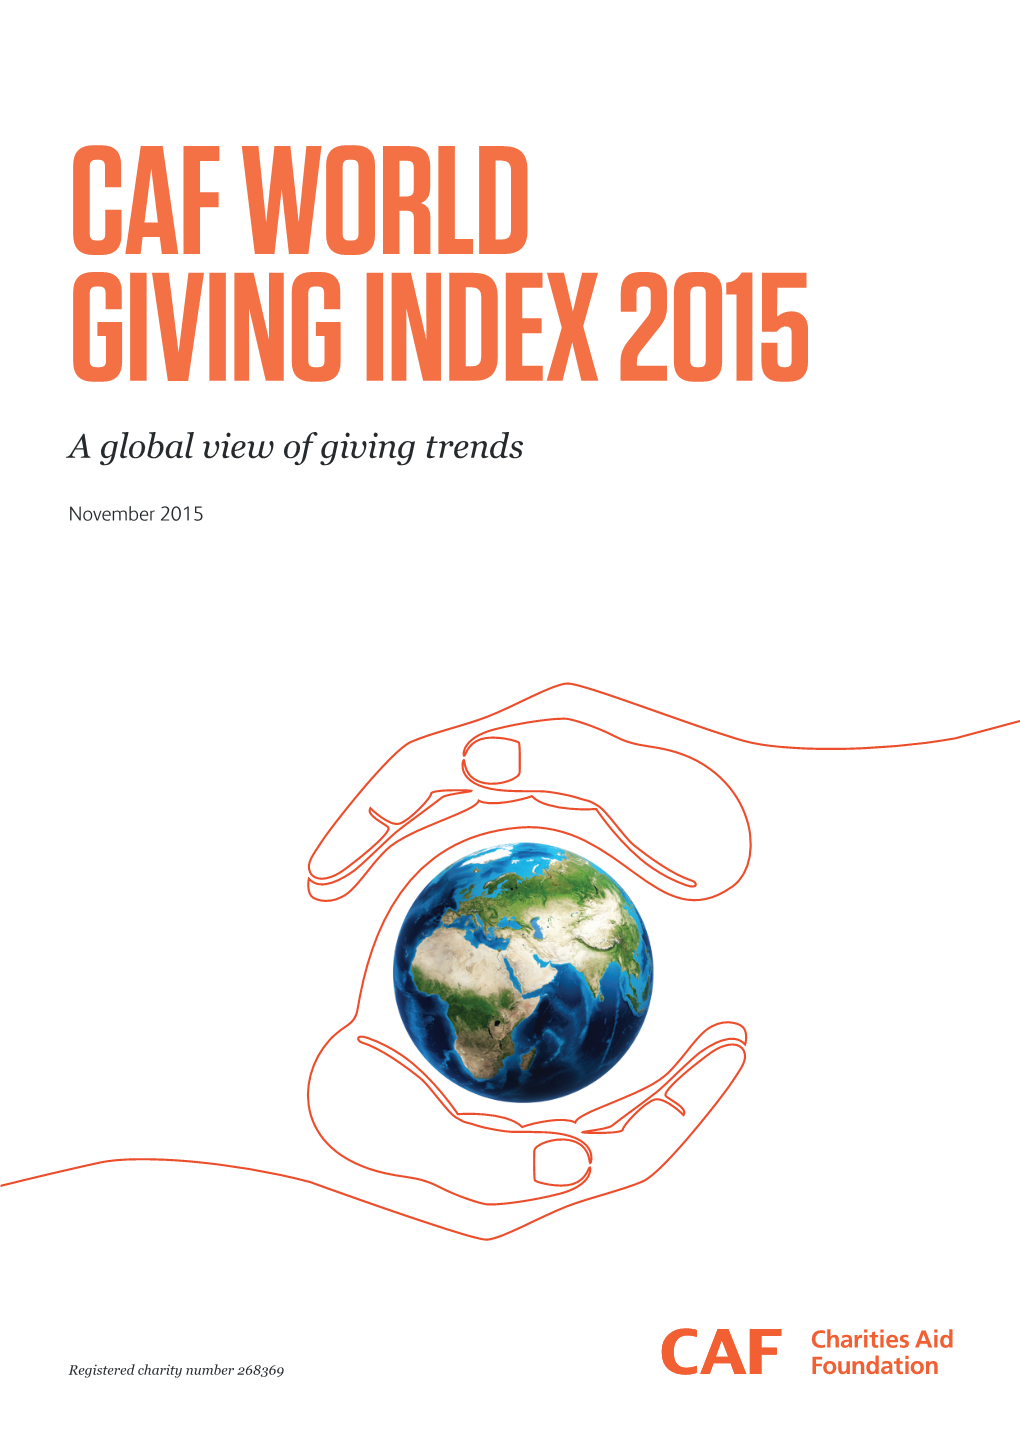 WORLD GIVING INDEX 2015 a Global View of Giving Trends